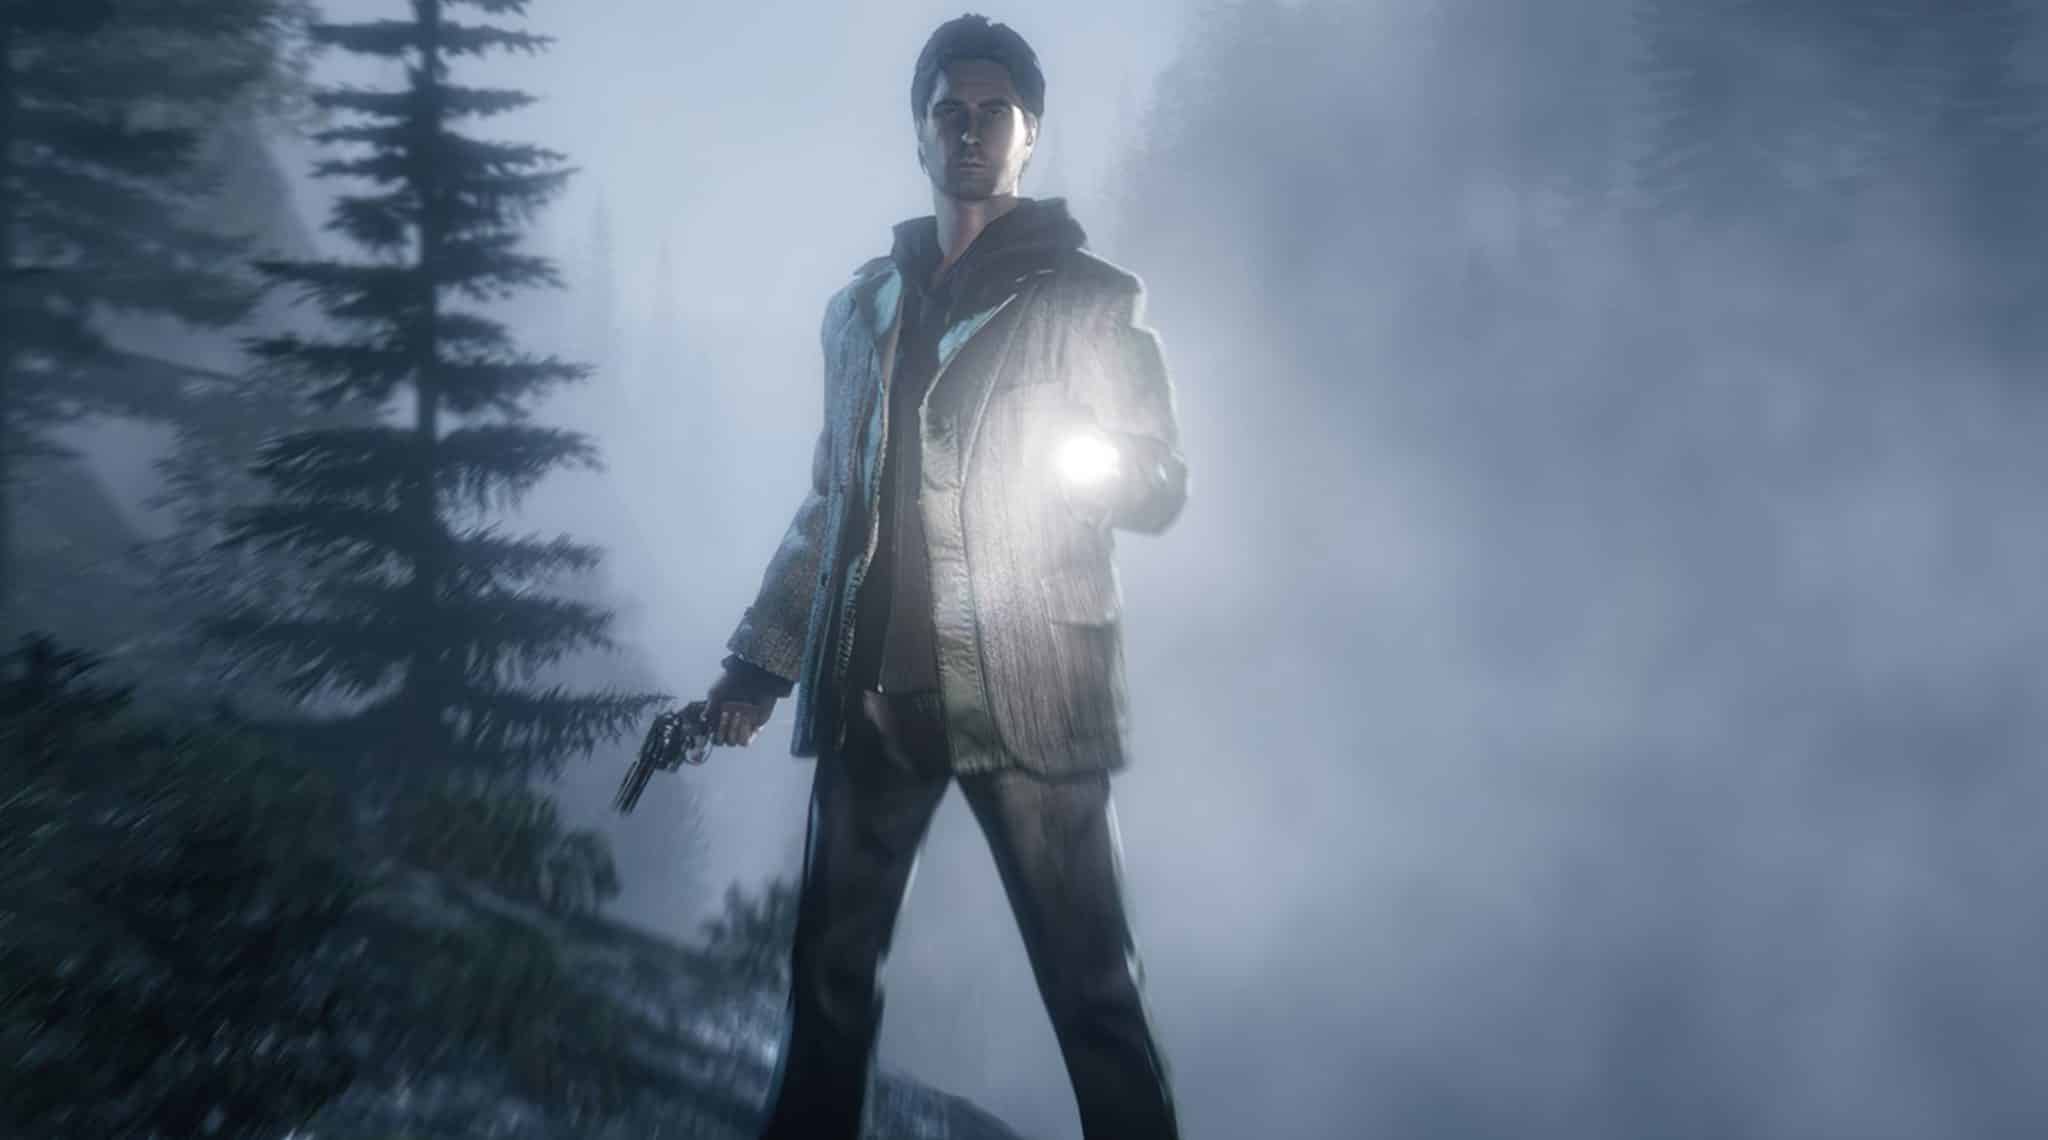 Alan Wake Remastered review - It's made me realise I was right to